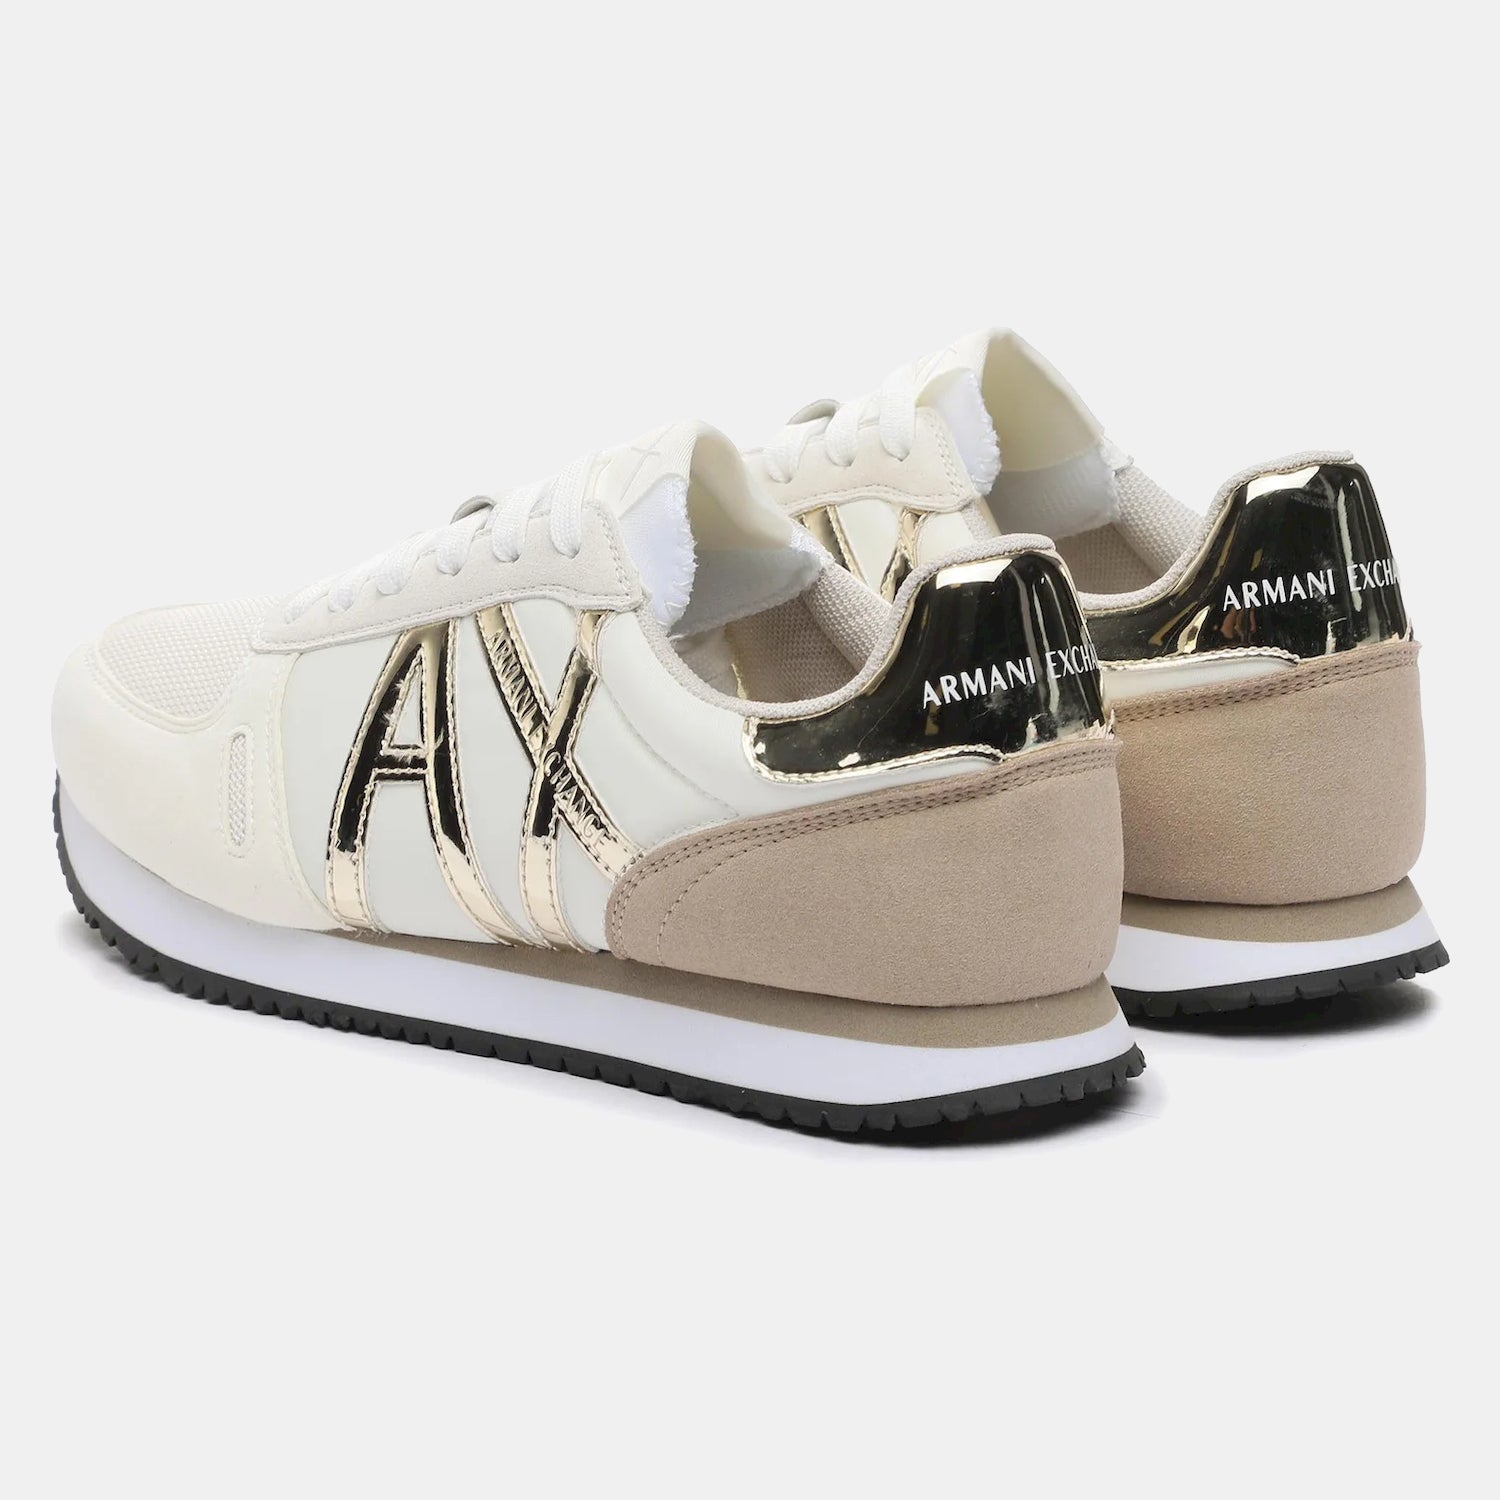 Armani Exchange Sapatilhas Sneakers Shoes Xdx031 Xv137 Beige Gold Beige Ouro_shot1